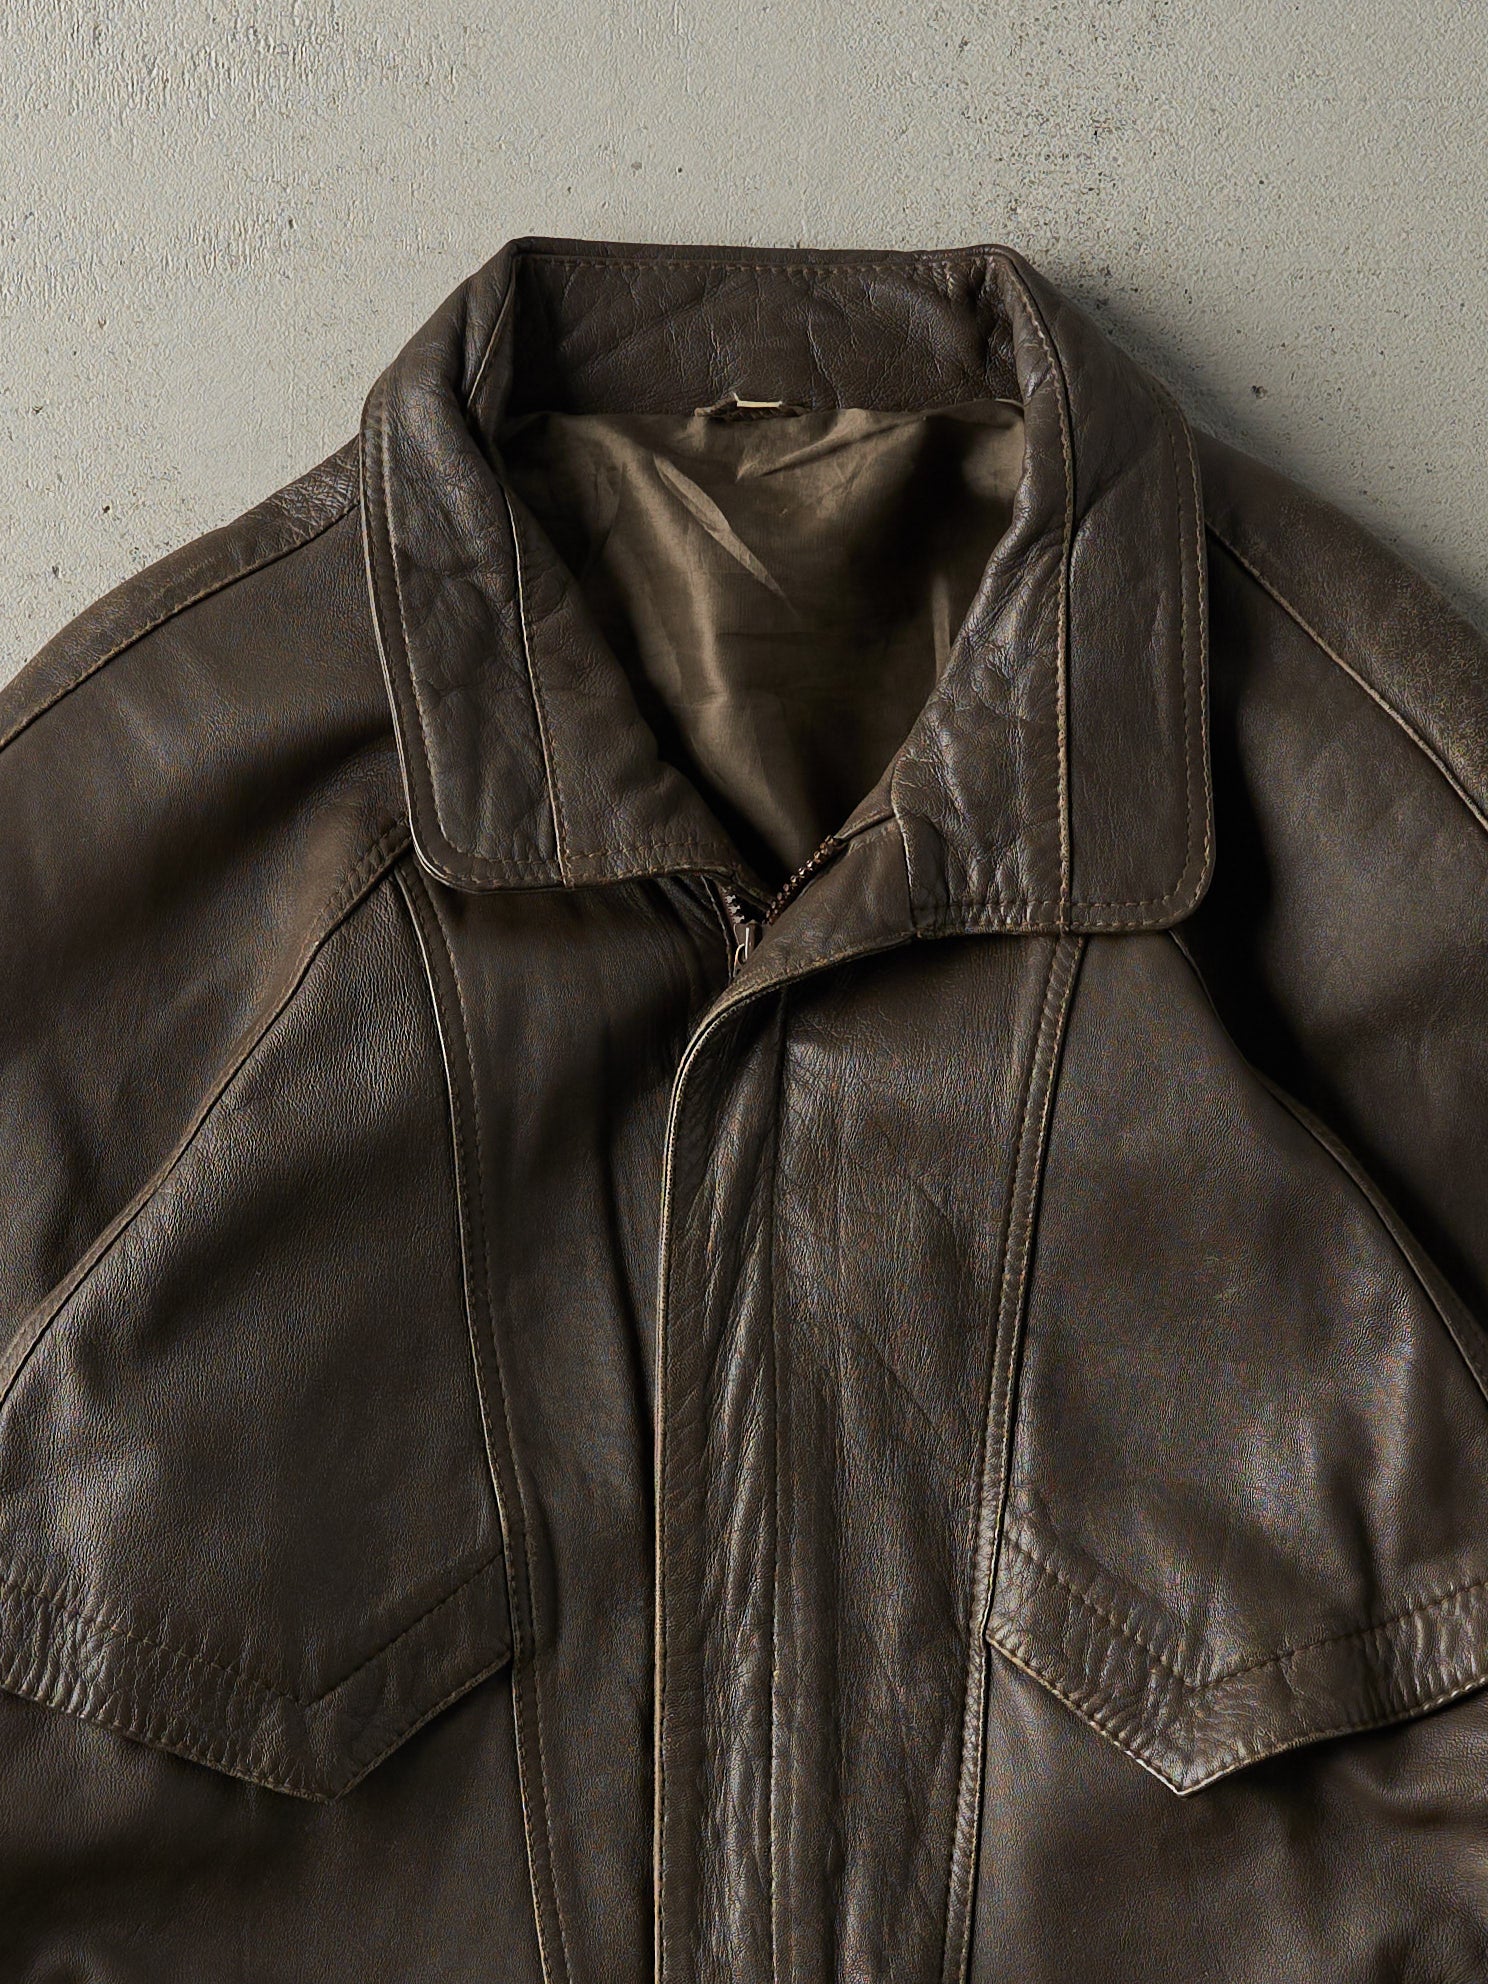 Vintage 90s Faded Brown Leather Jacket (L)